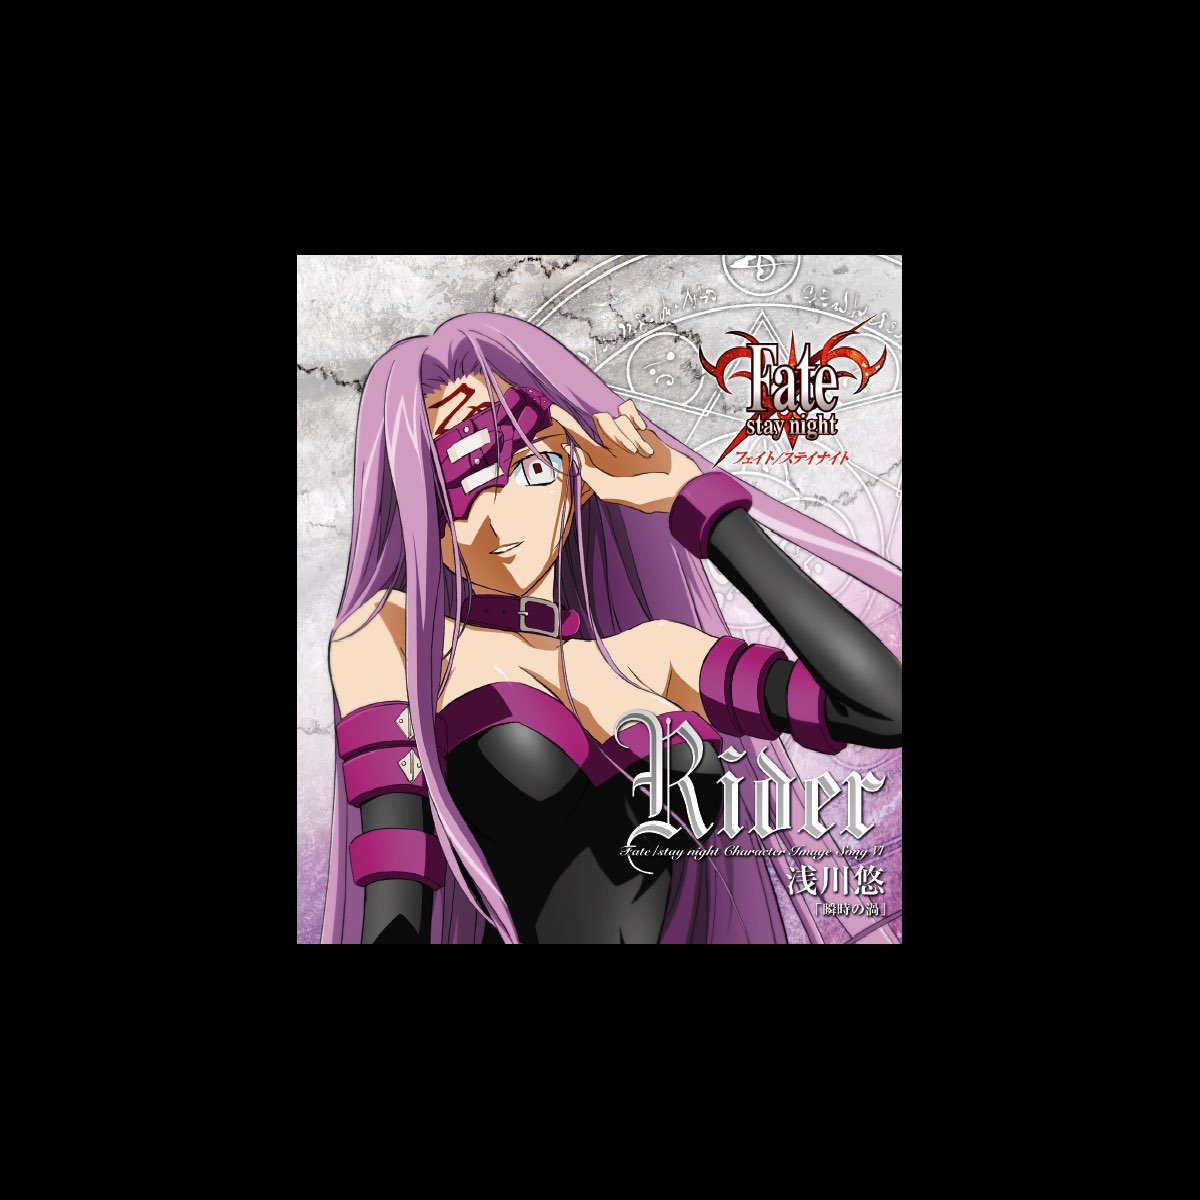 Fate Stay Night Character Image Song 6 Rider Ep De 淺川 悠 En Apple Music